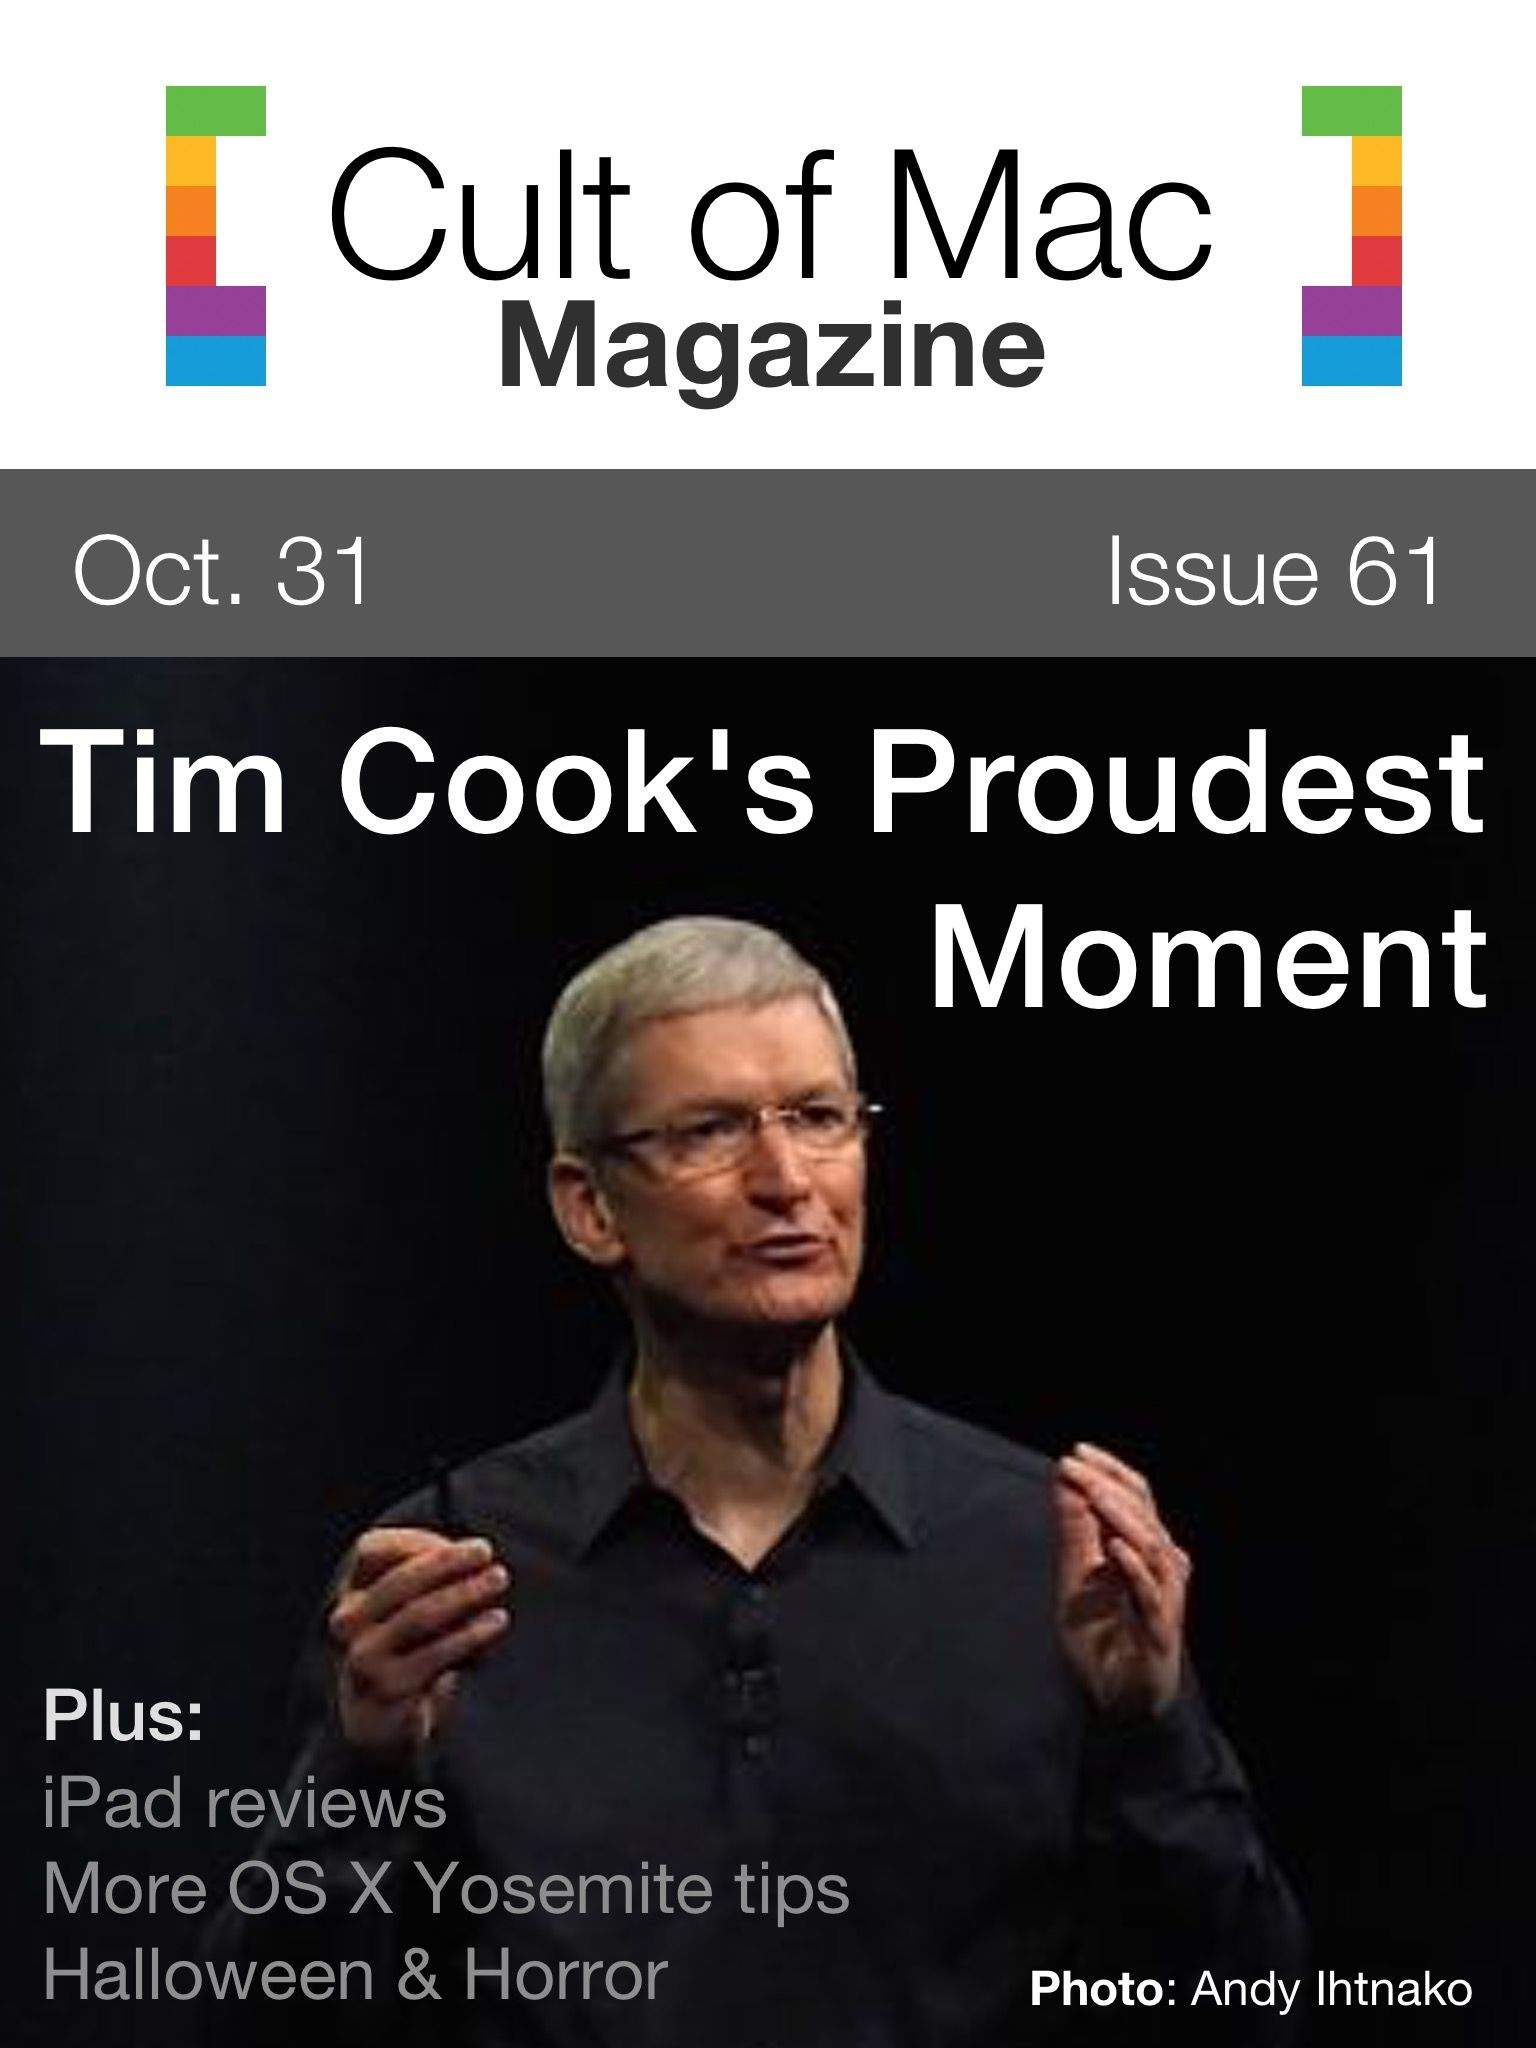 Tim Cook's historic letter, iPad reviews, and more! Cover Design: Rob LeFebvre/Cult of Mac